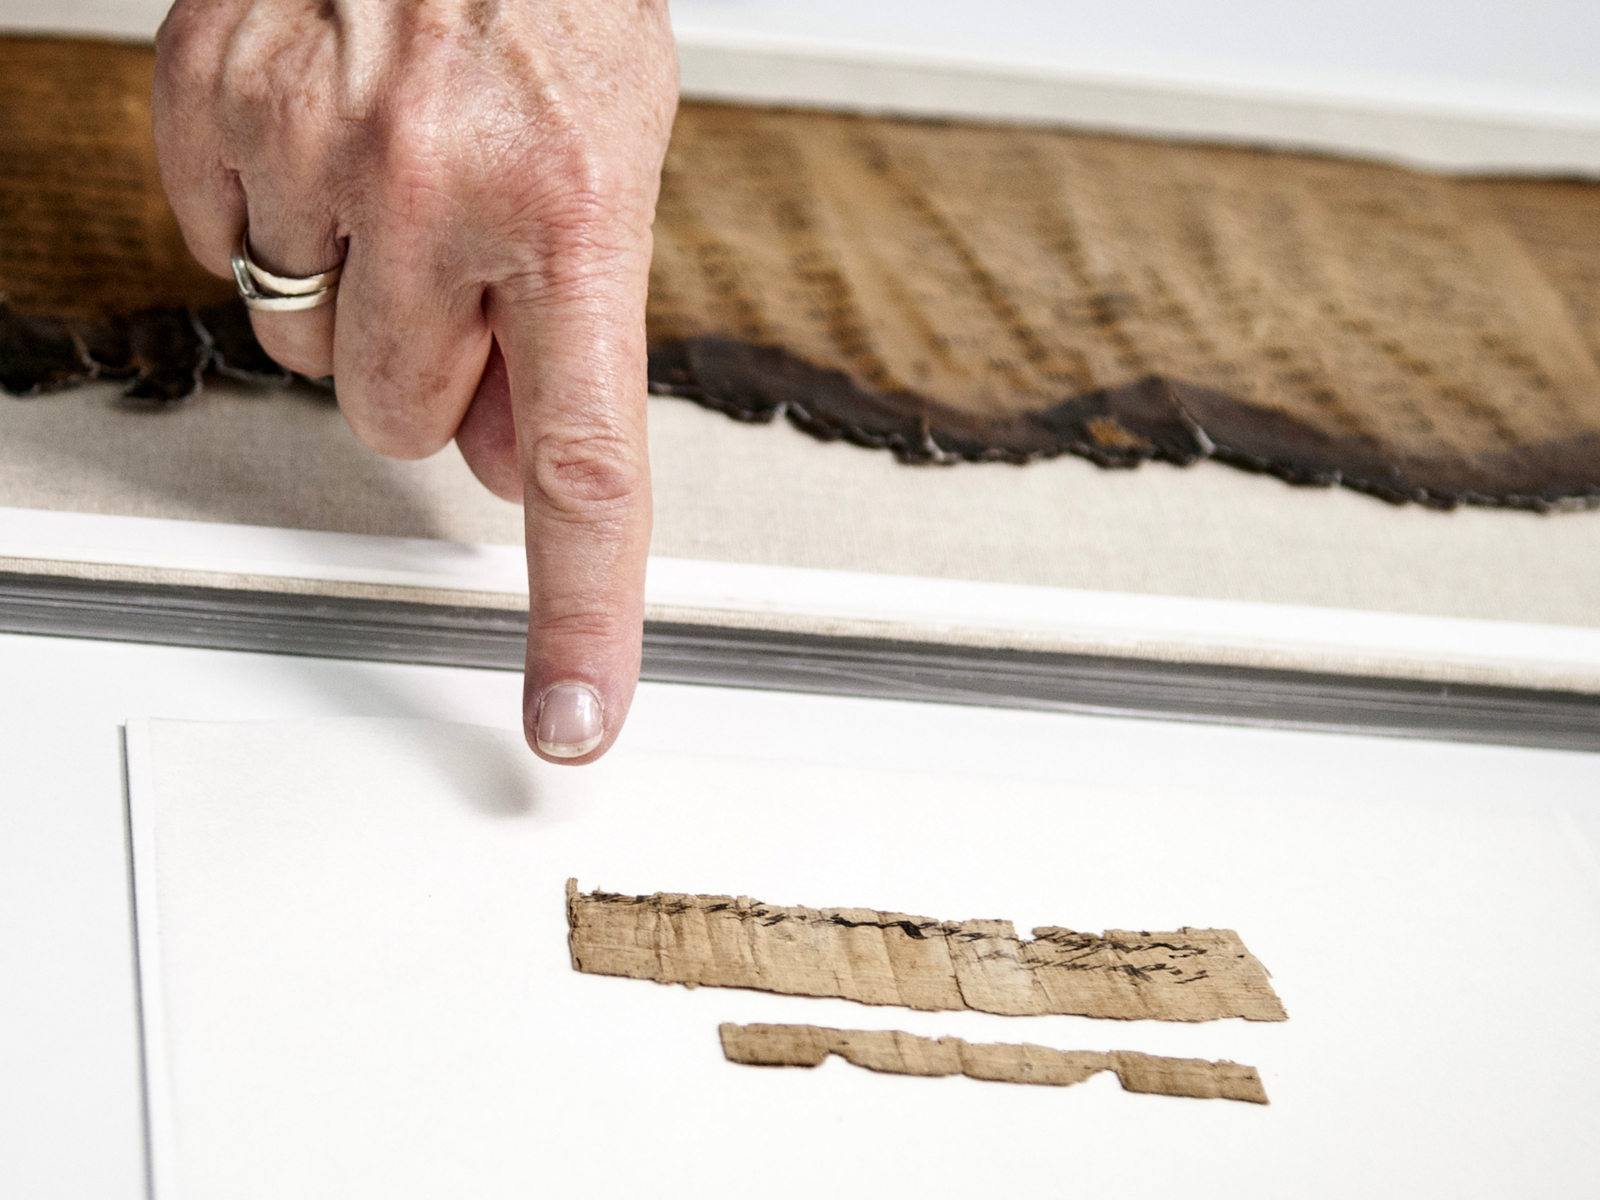 The document is preserved in the Israel Antiquities Authority’s Dead Sea Scrolls
laboratories. Photo: Shai Halevi, courtesy of the Israel Antiquities Authority.